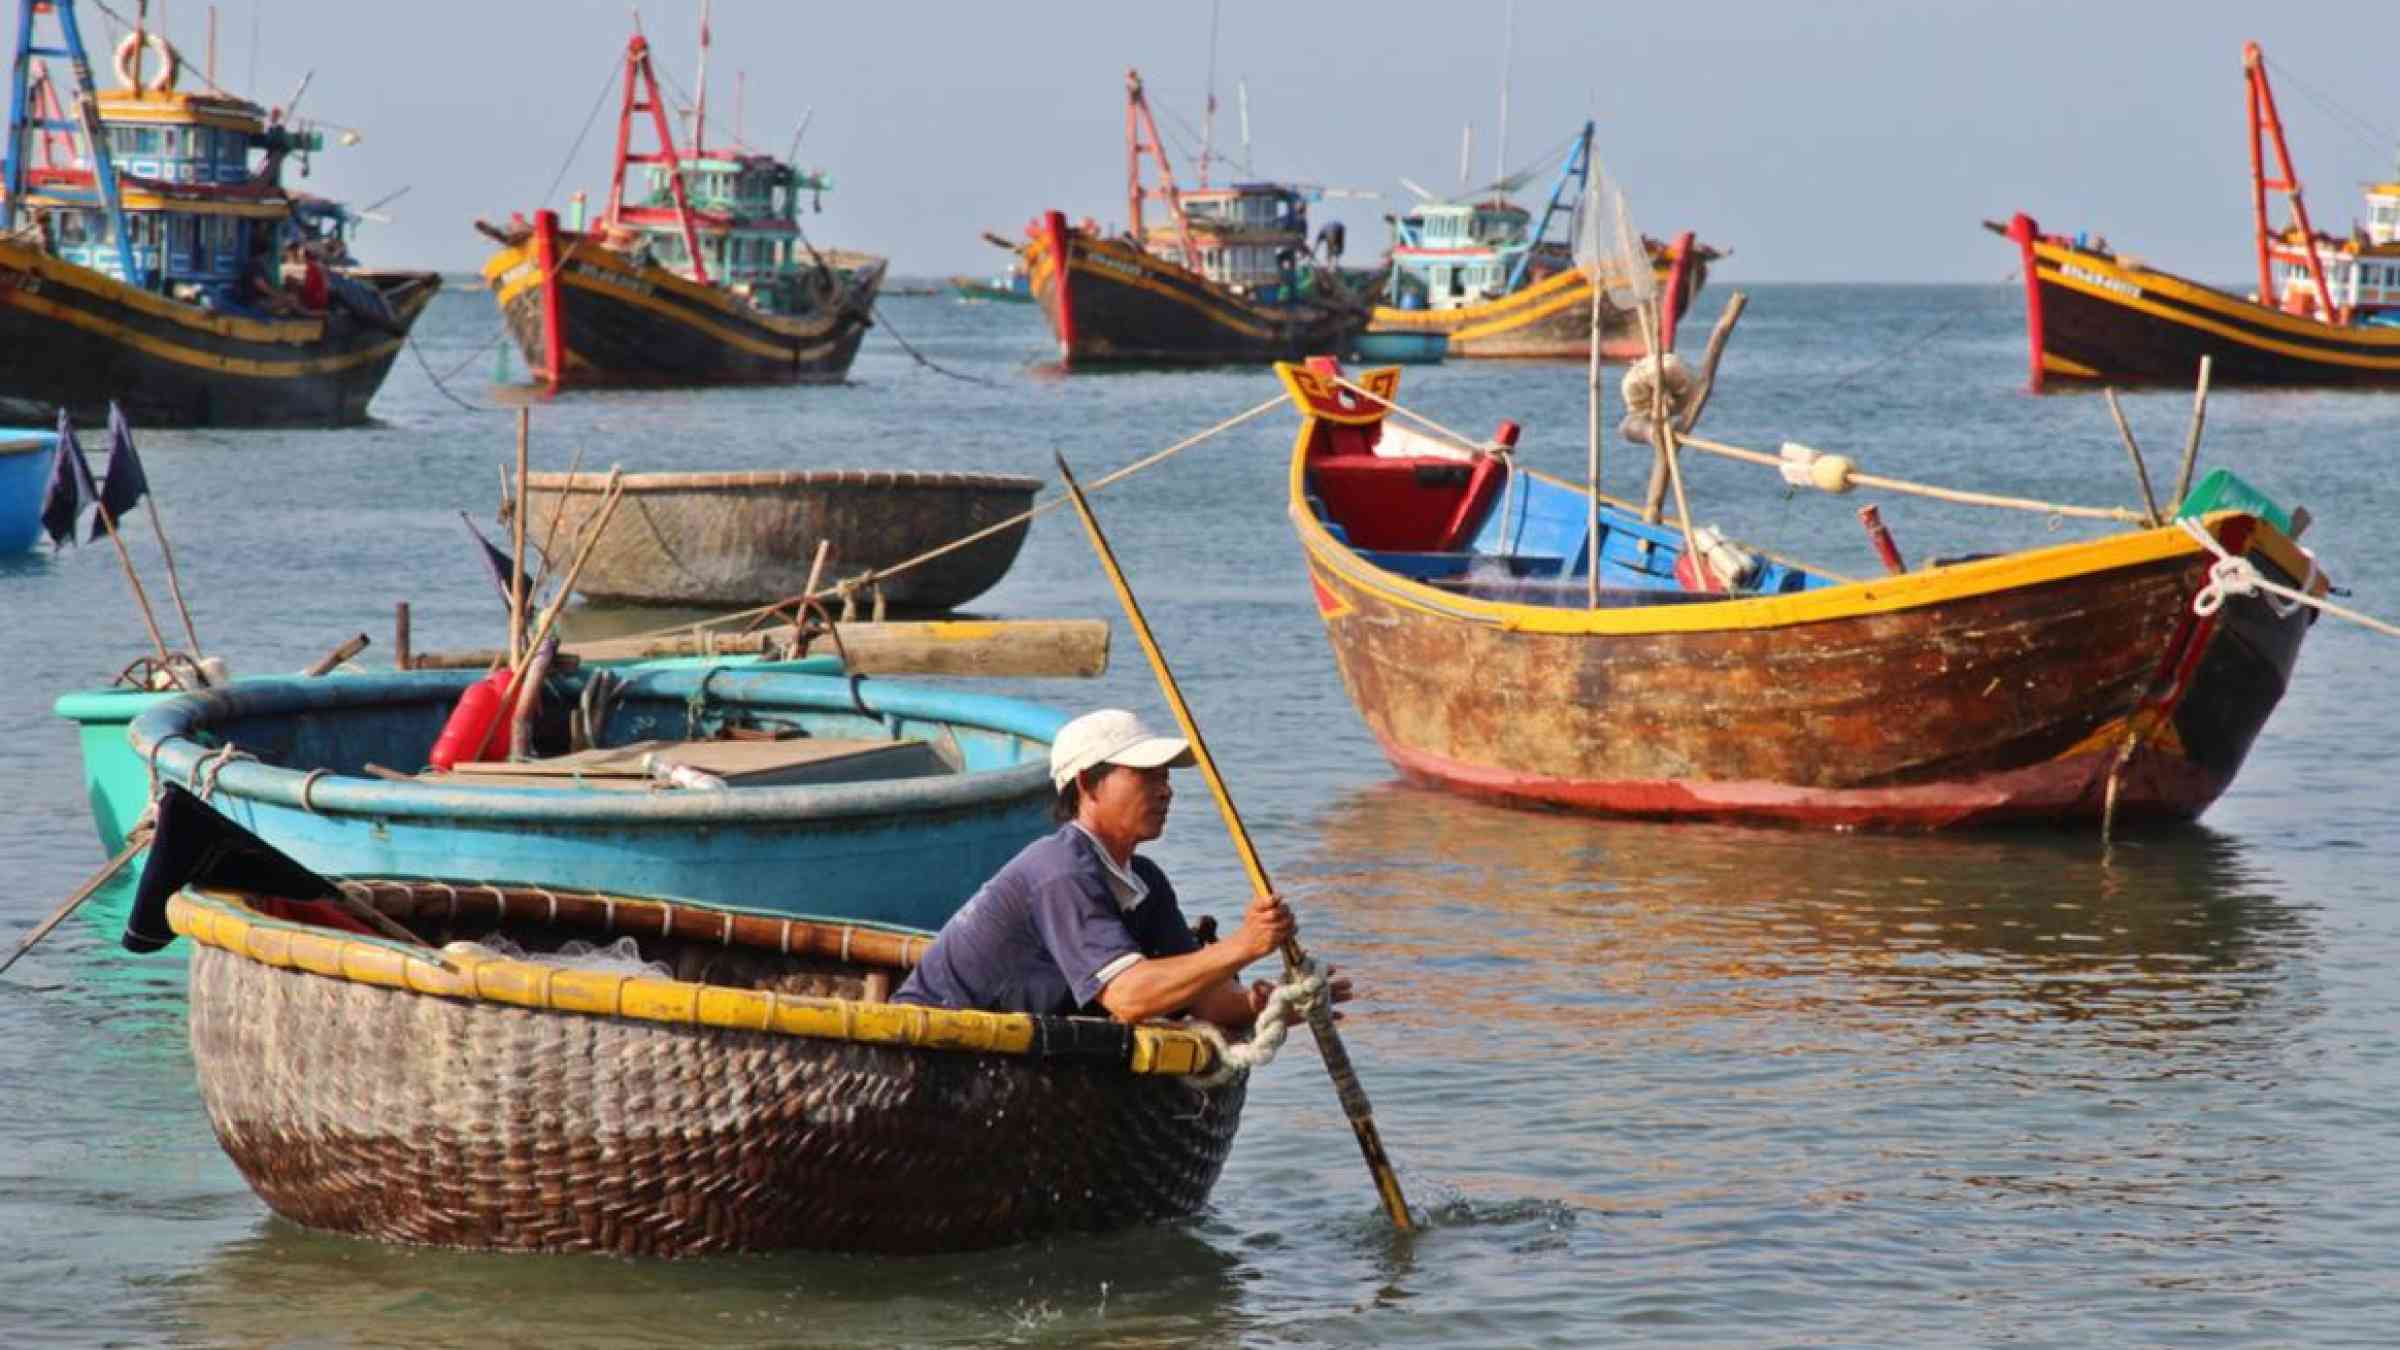 Small-scale fisheries offer strategies for resilience